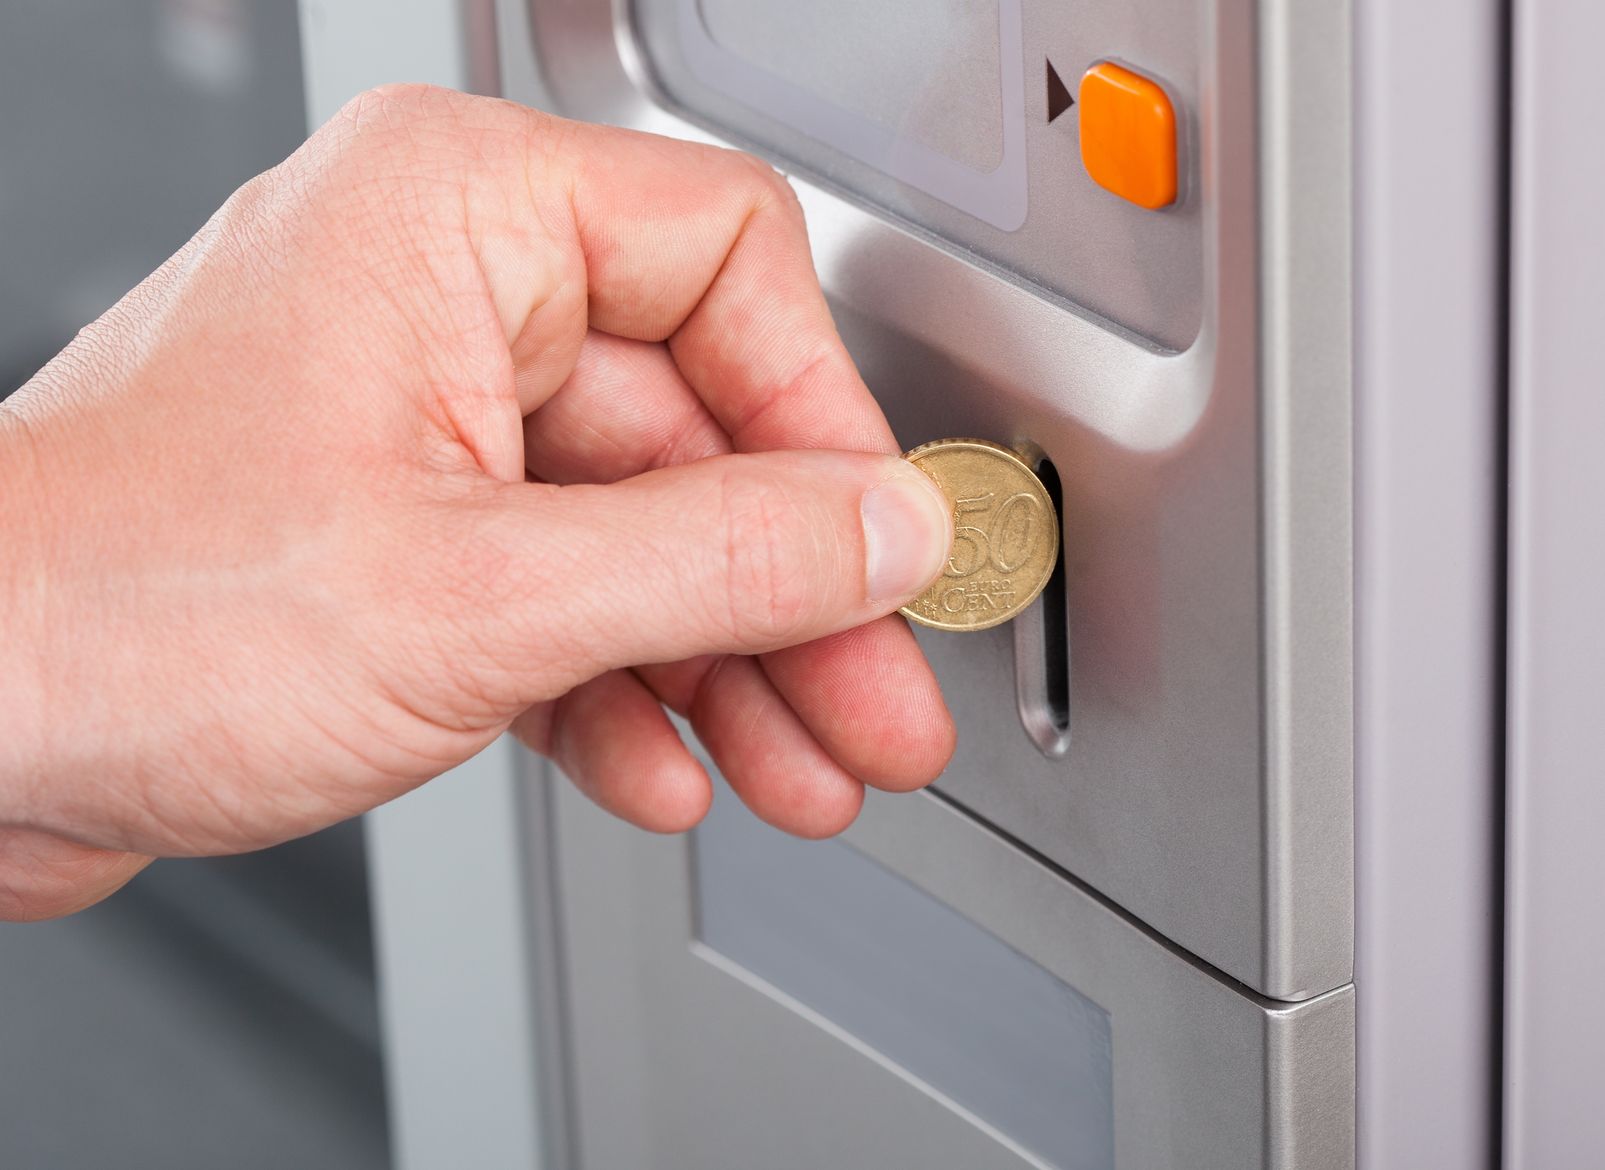 21328457 - close-up of human hand inserting coin in vending machine